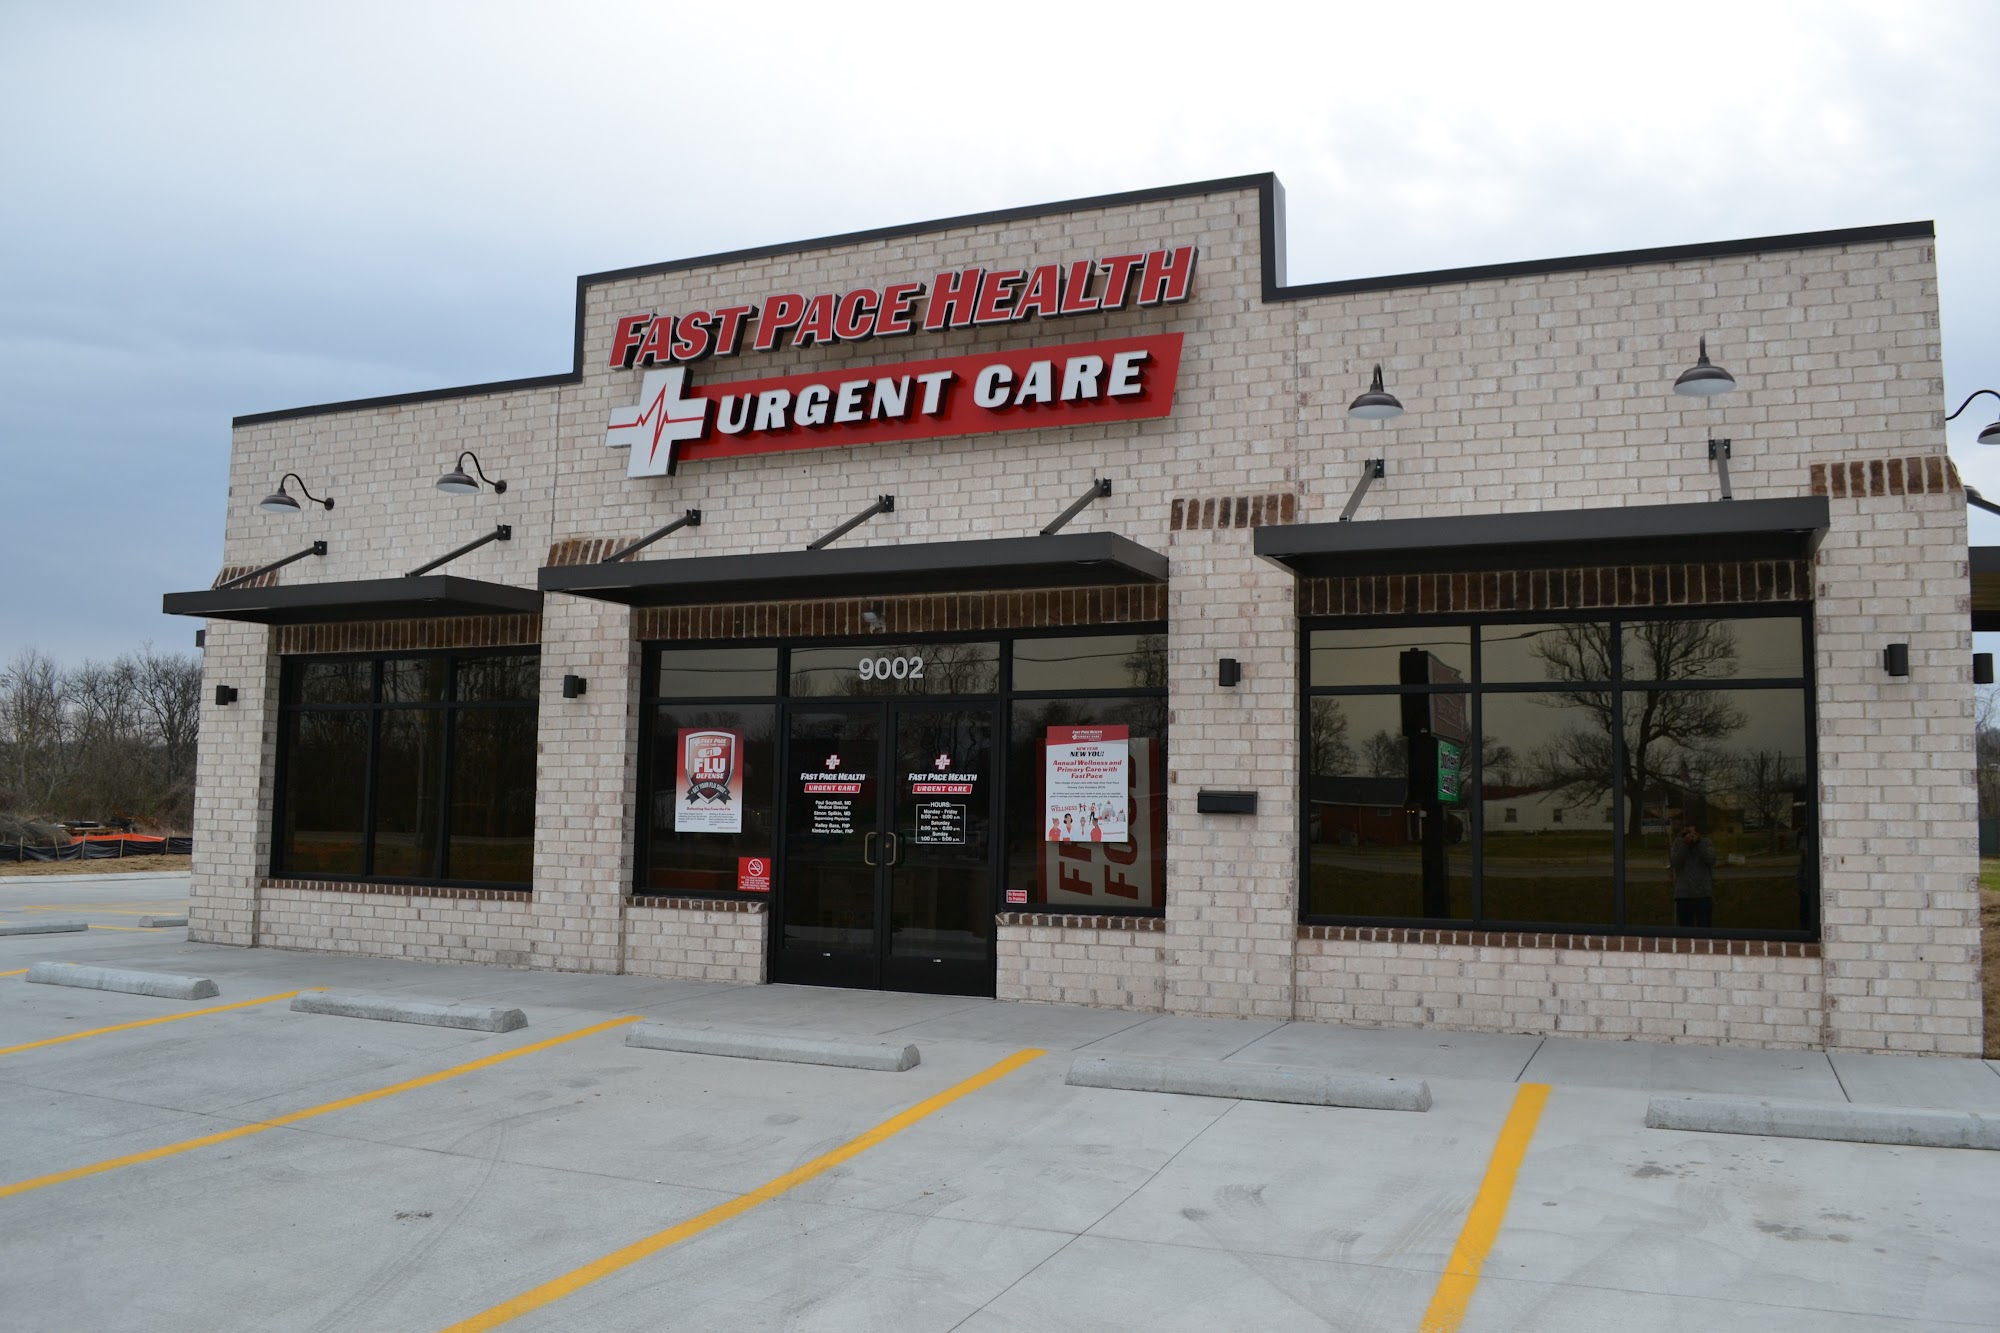 Fast Pace Health Urgent Care - Clarksdale, MS 619 S State St, Clarksdale Mississippi 38614